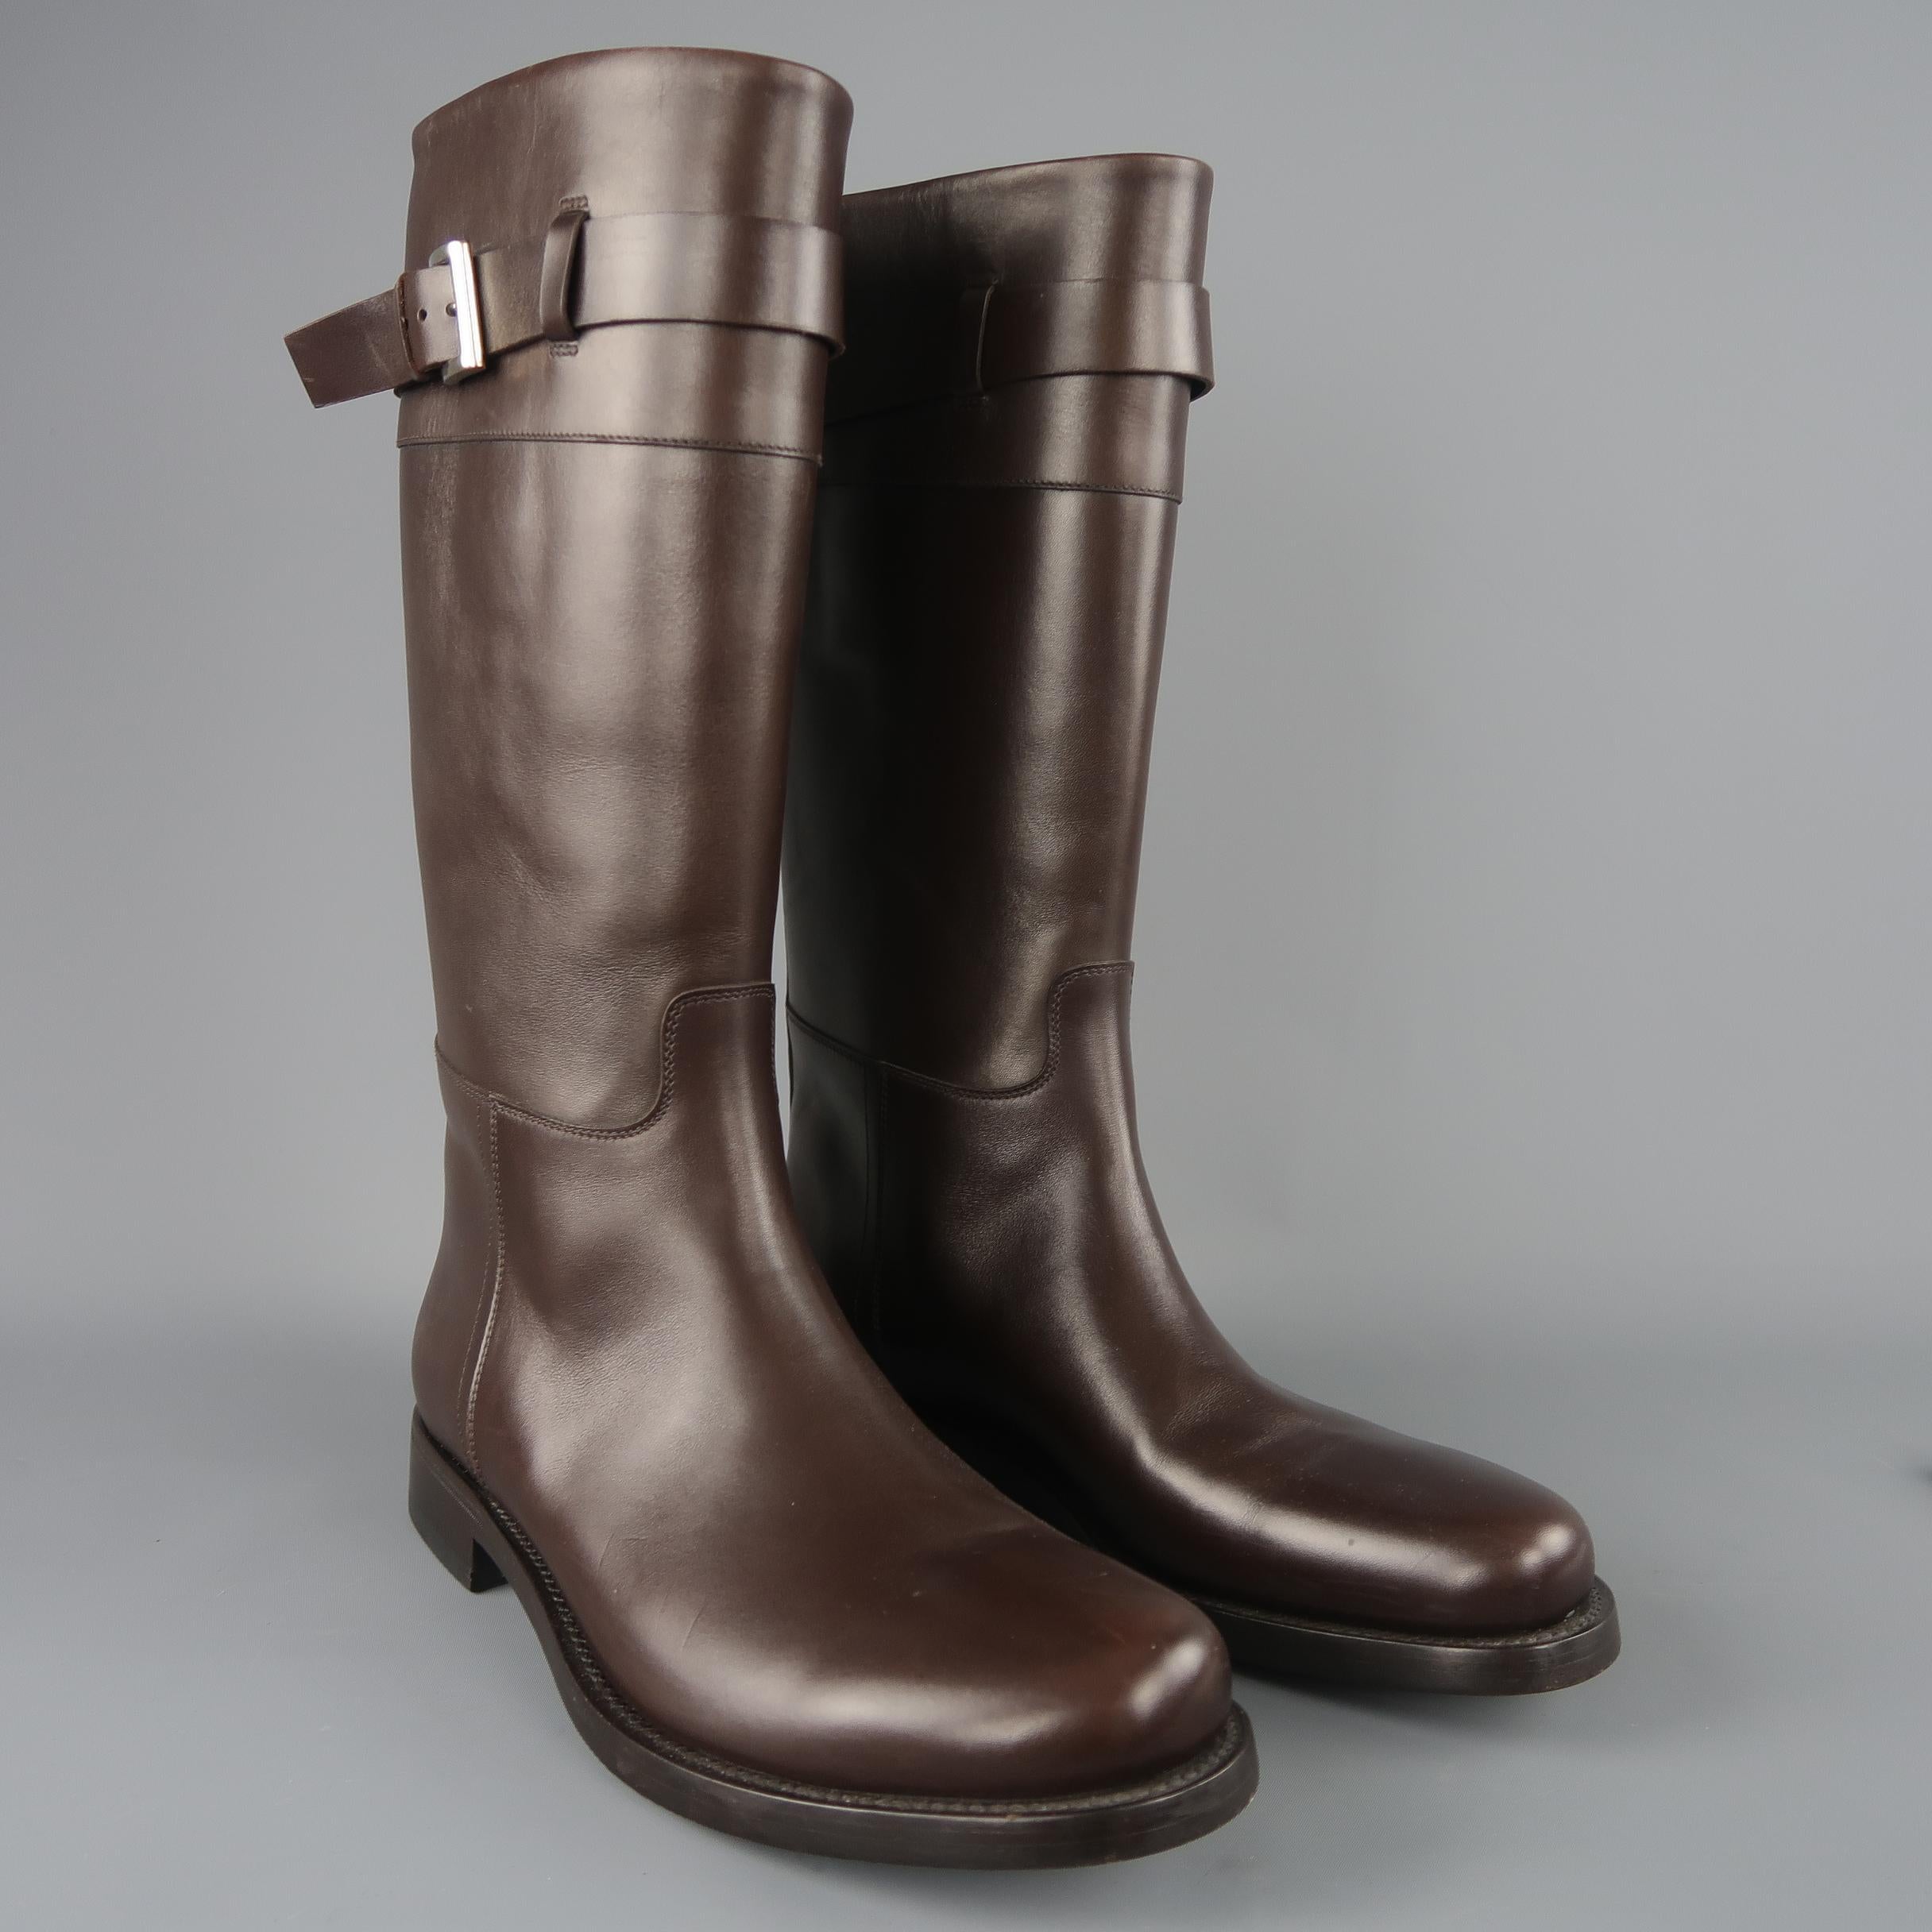 Prada biker style boots come in chocolate brown smooth leather with a tapered toe, heeled sole, and tall pull on shaft with silver tone buckled strap. Made in Italy.
 
New with Tag.
Marked: UK 10
 
Measurements:
Length: 15 in.